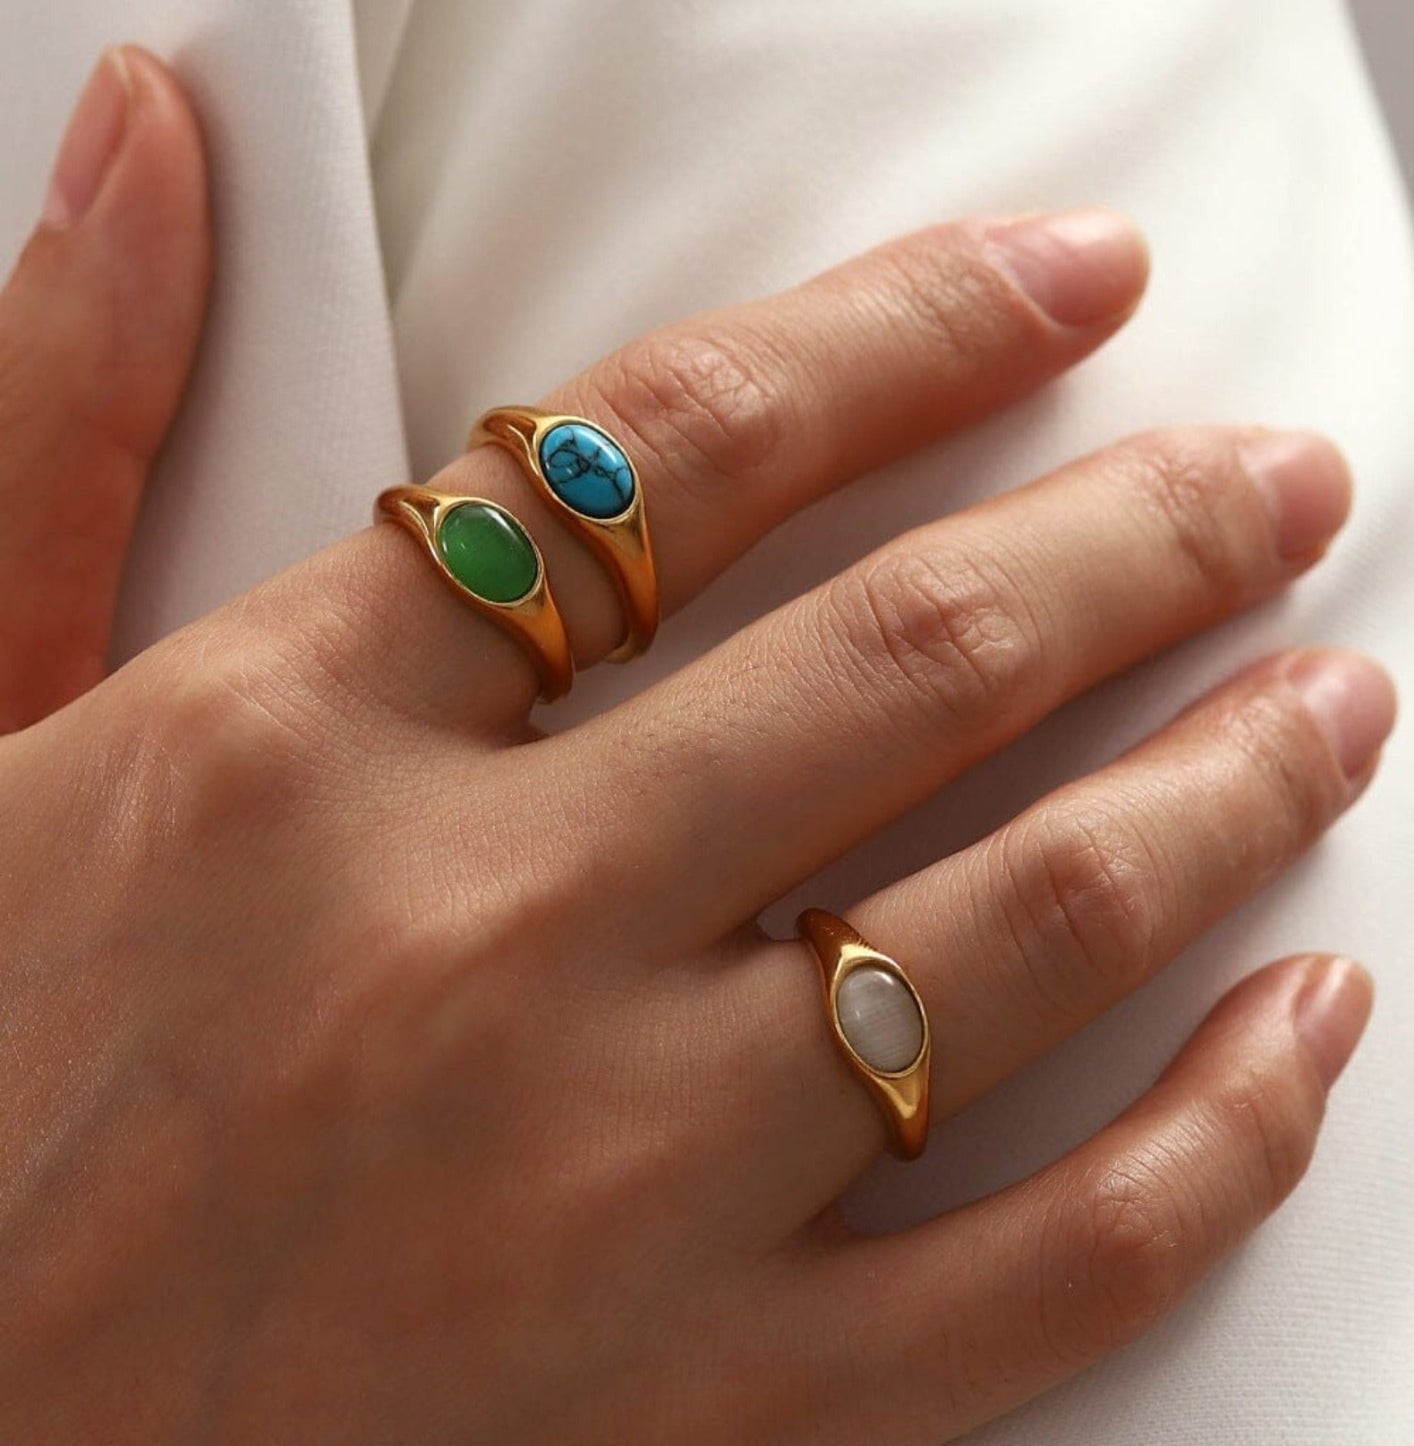 GREEN GEMSTONE RING ring Yubama Jewelry Online Store - The Elegant Designs of Gold and Silver ! 